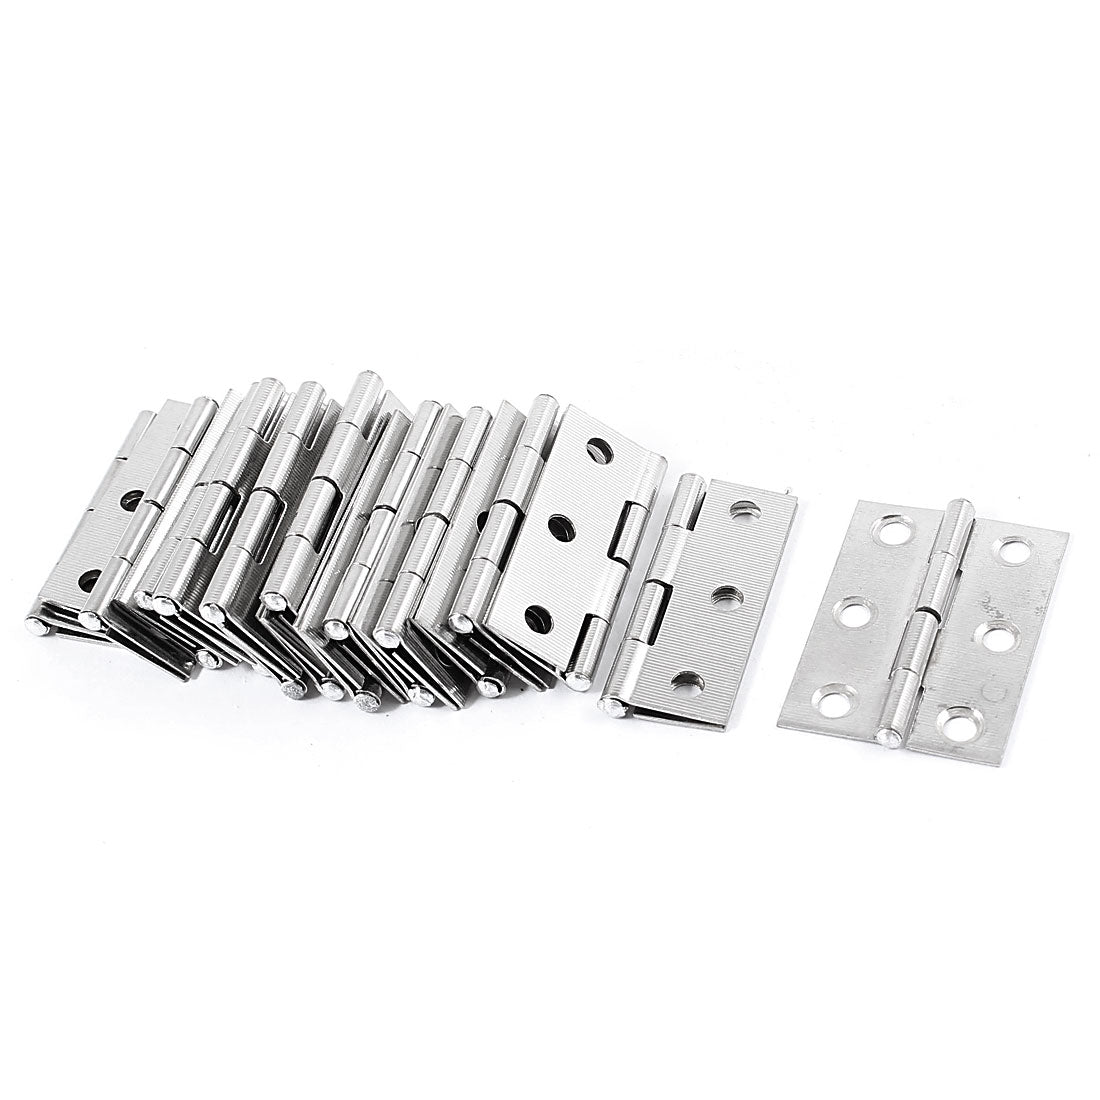 uxcell Uxcell 1.7" Length Silver Tone Stainless Steel Single Action Door Hinges 20 Pcs